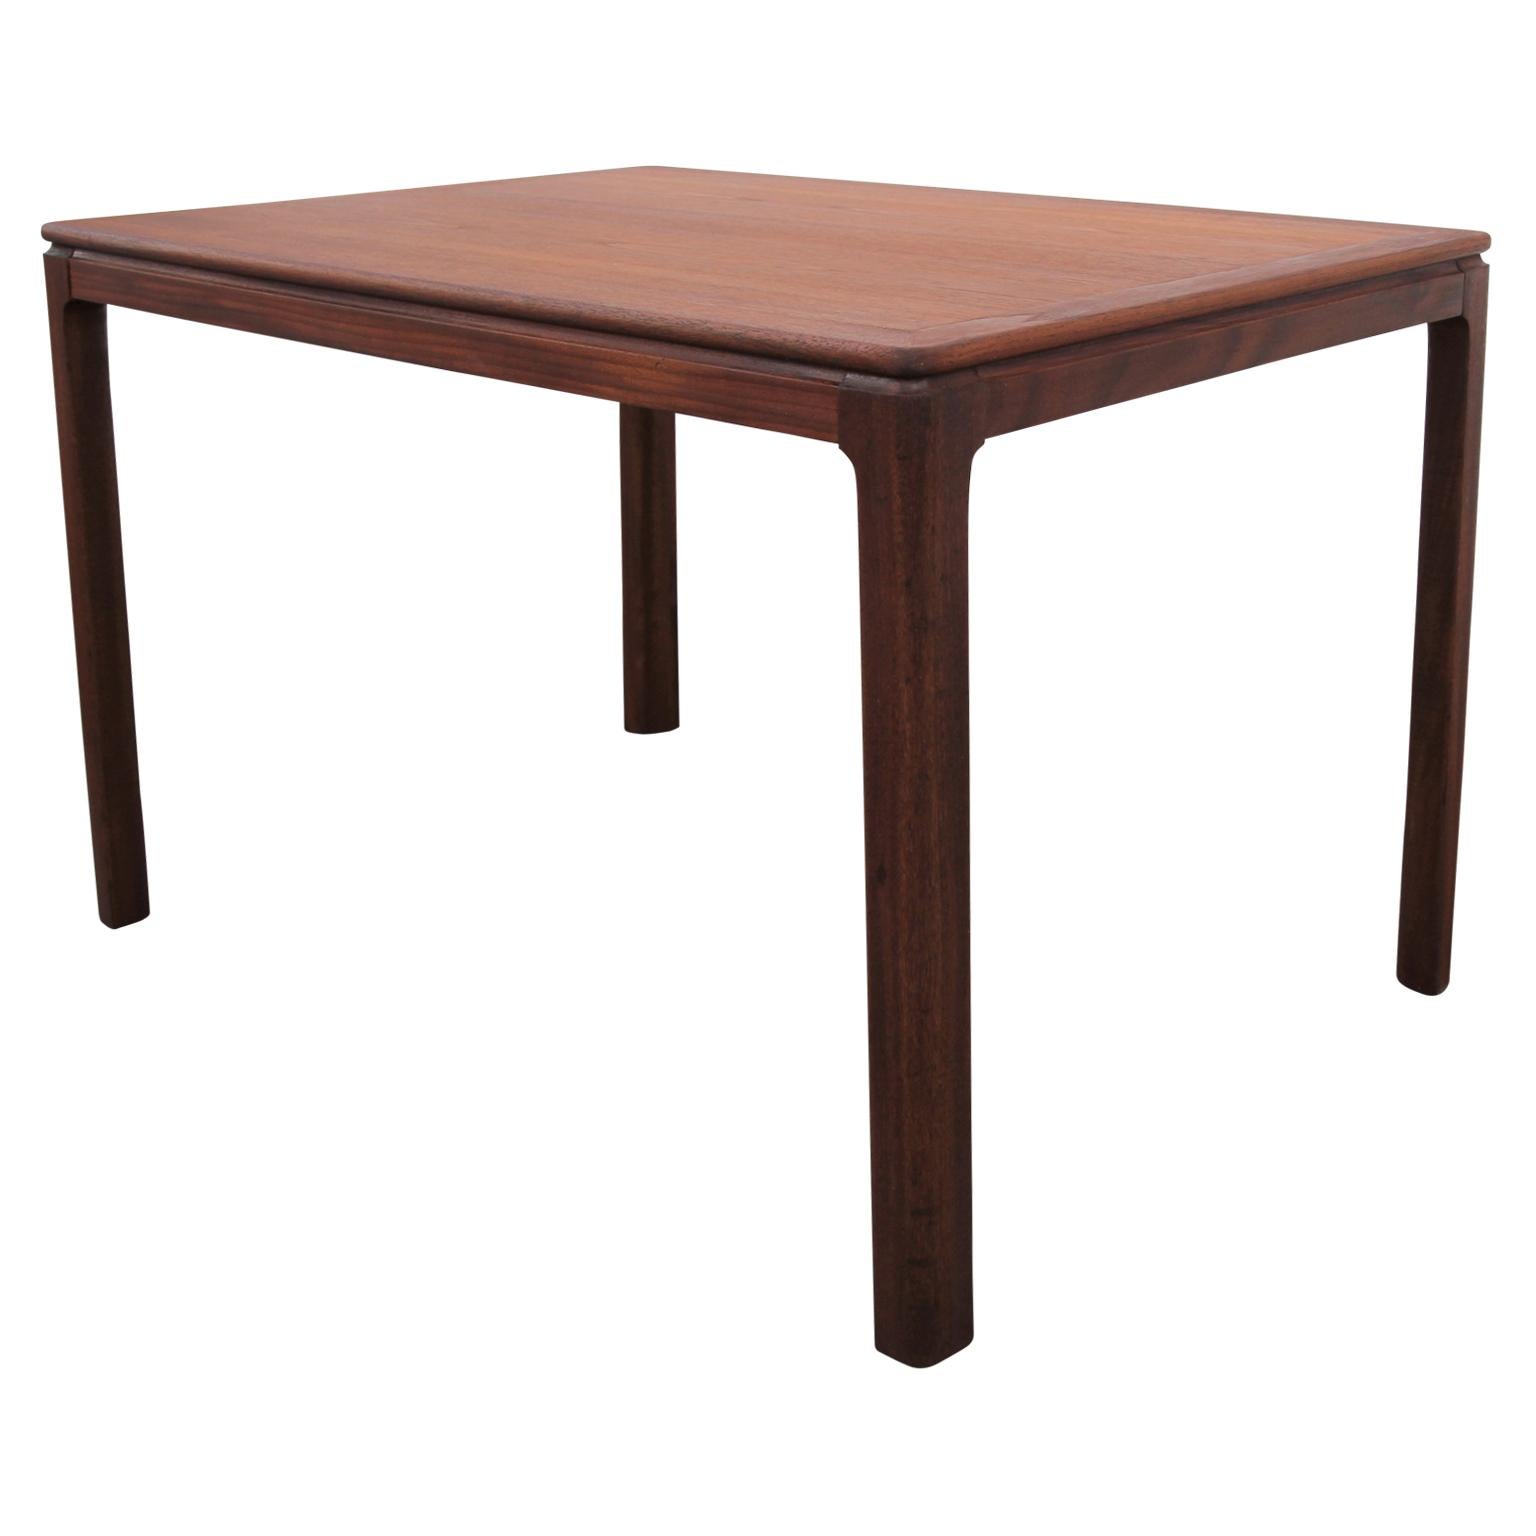 Danish rectangular side table in the Mid-Century Modern style. The tabletop and legs are beautifully constructed from teak. Restored.